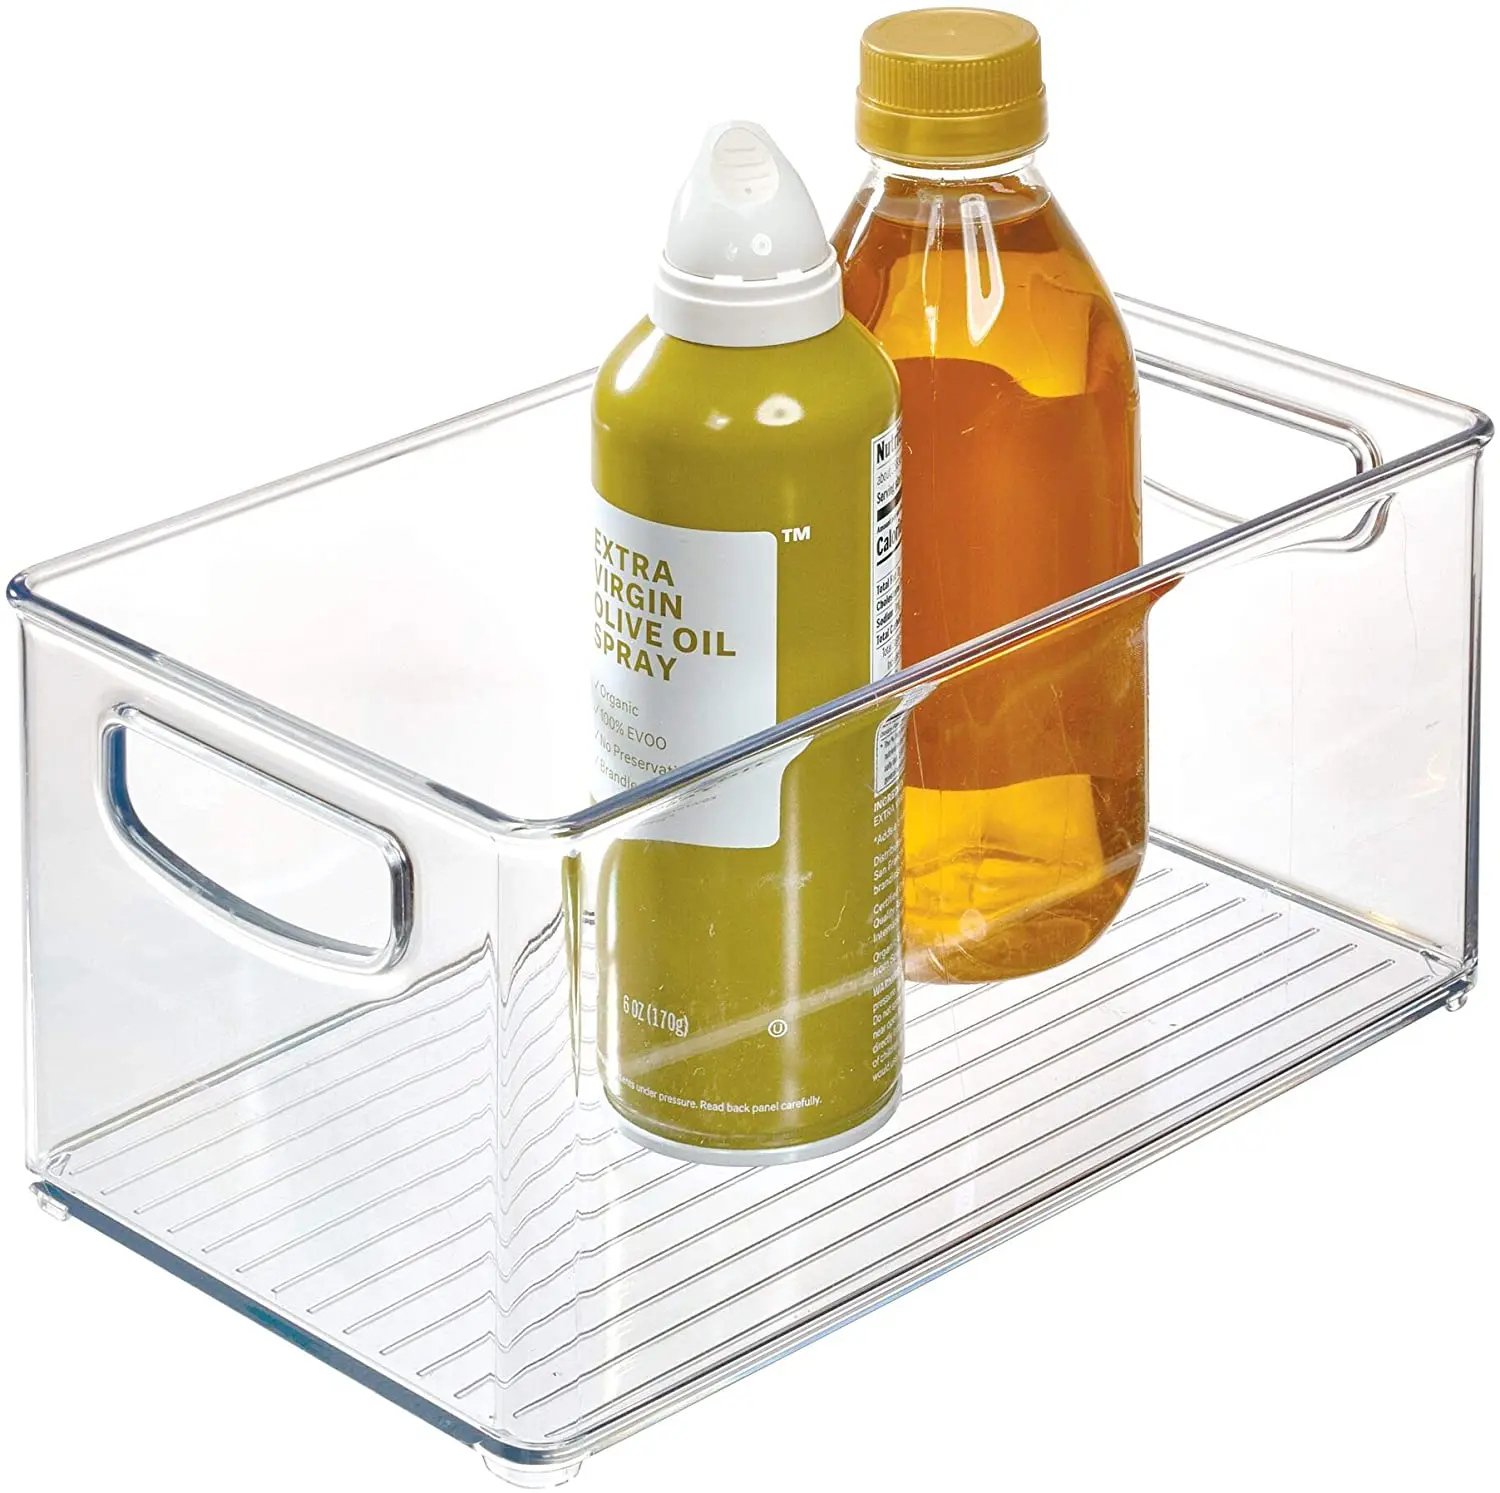 

Plastic Storage Bin with Handles for Kitchen Fridge Freezer Cabinet Organization wholesale clear stackable plastic storage bins, Any color is available